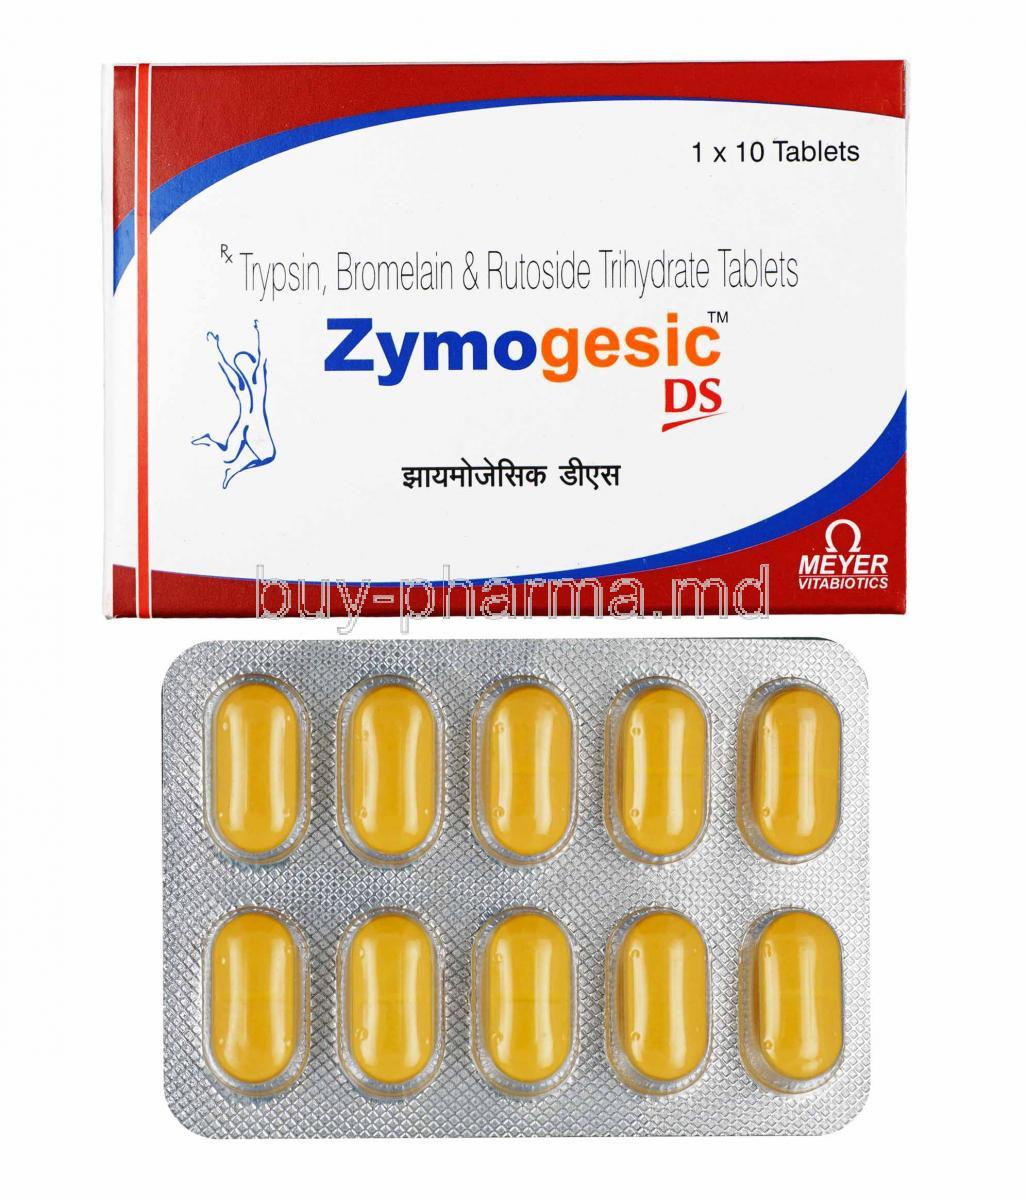 Zymogesic DS, Trypsin, Bromelain and Rutoside Trihydrate box and tablets